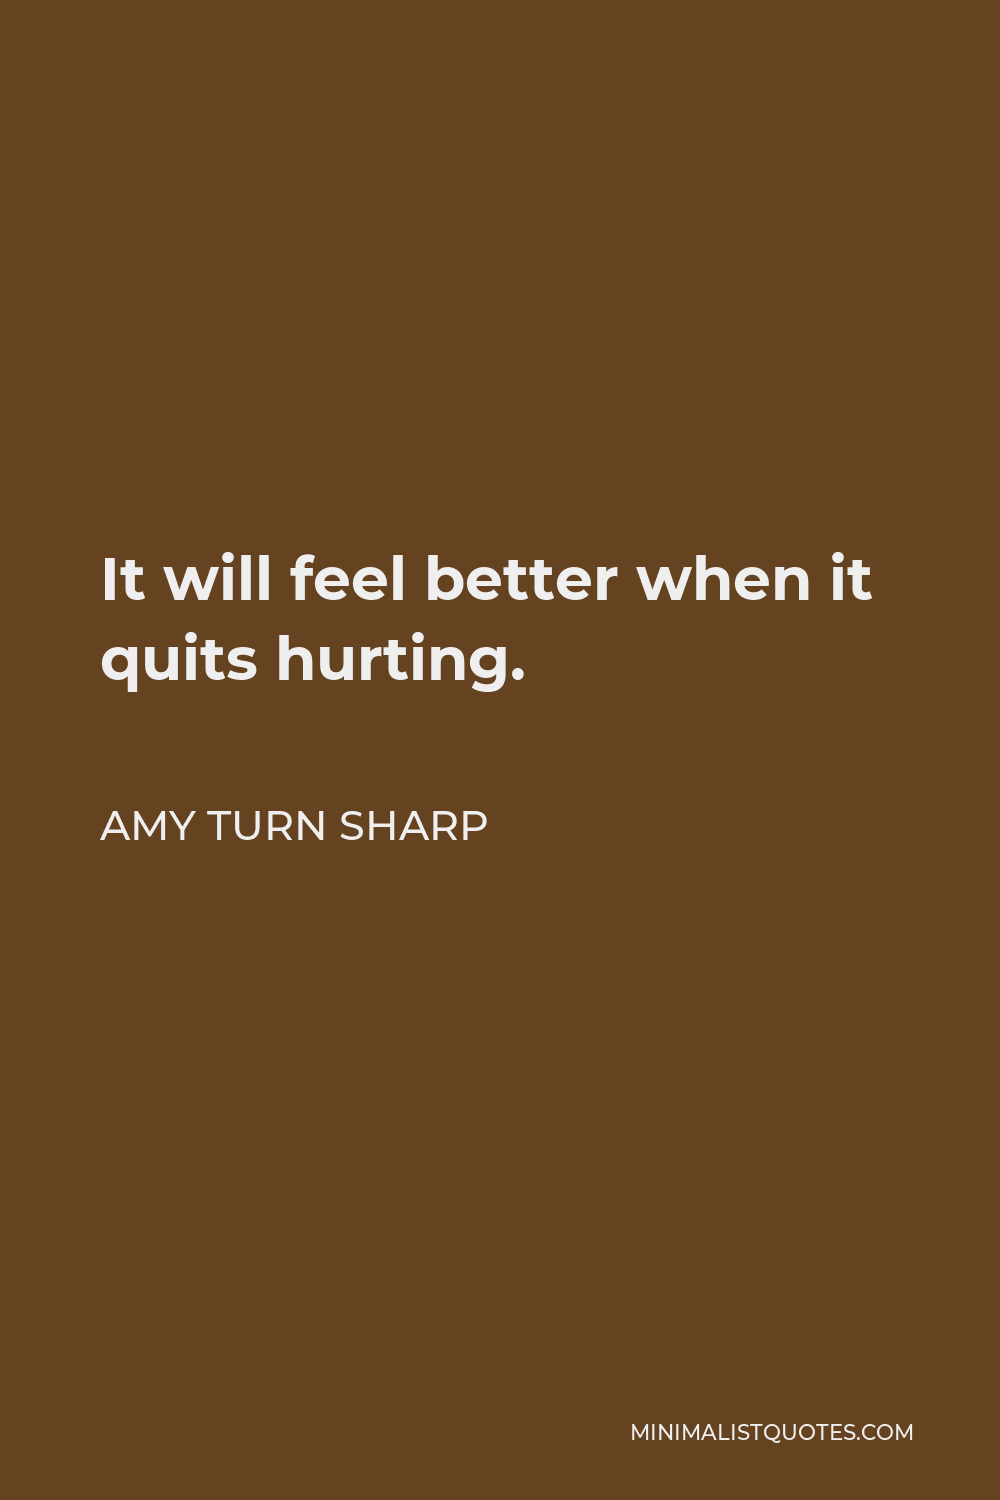 Amy Turn Sharp Quote - It will feel better when it quits hurting.